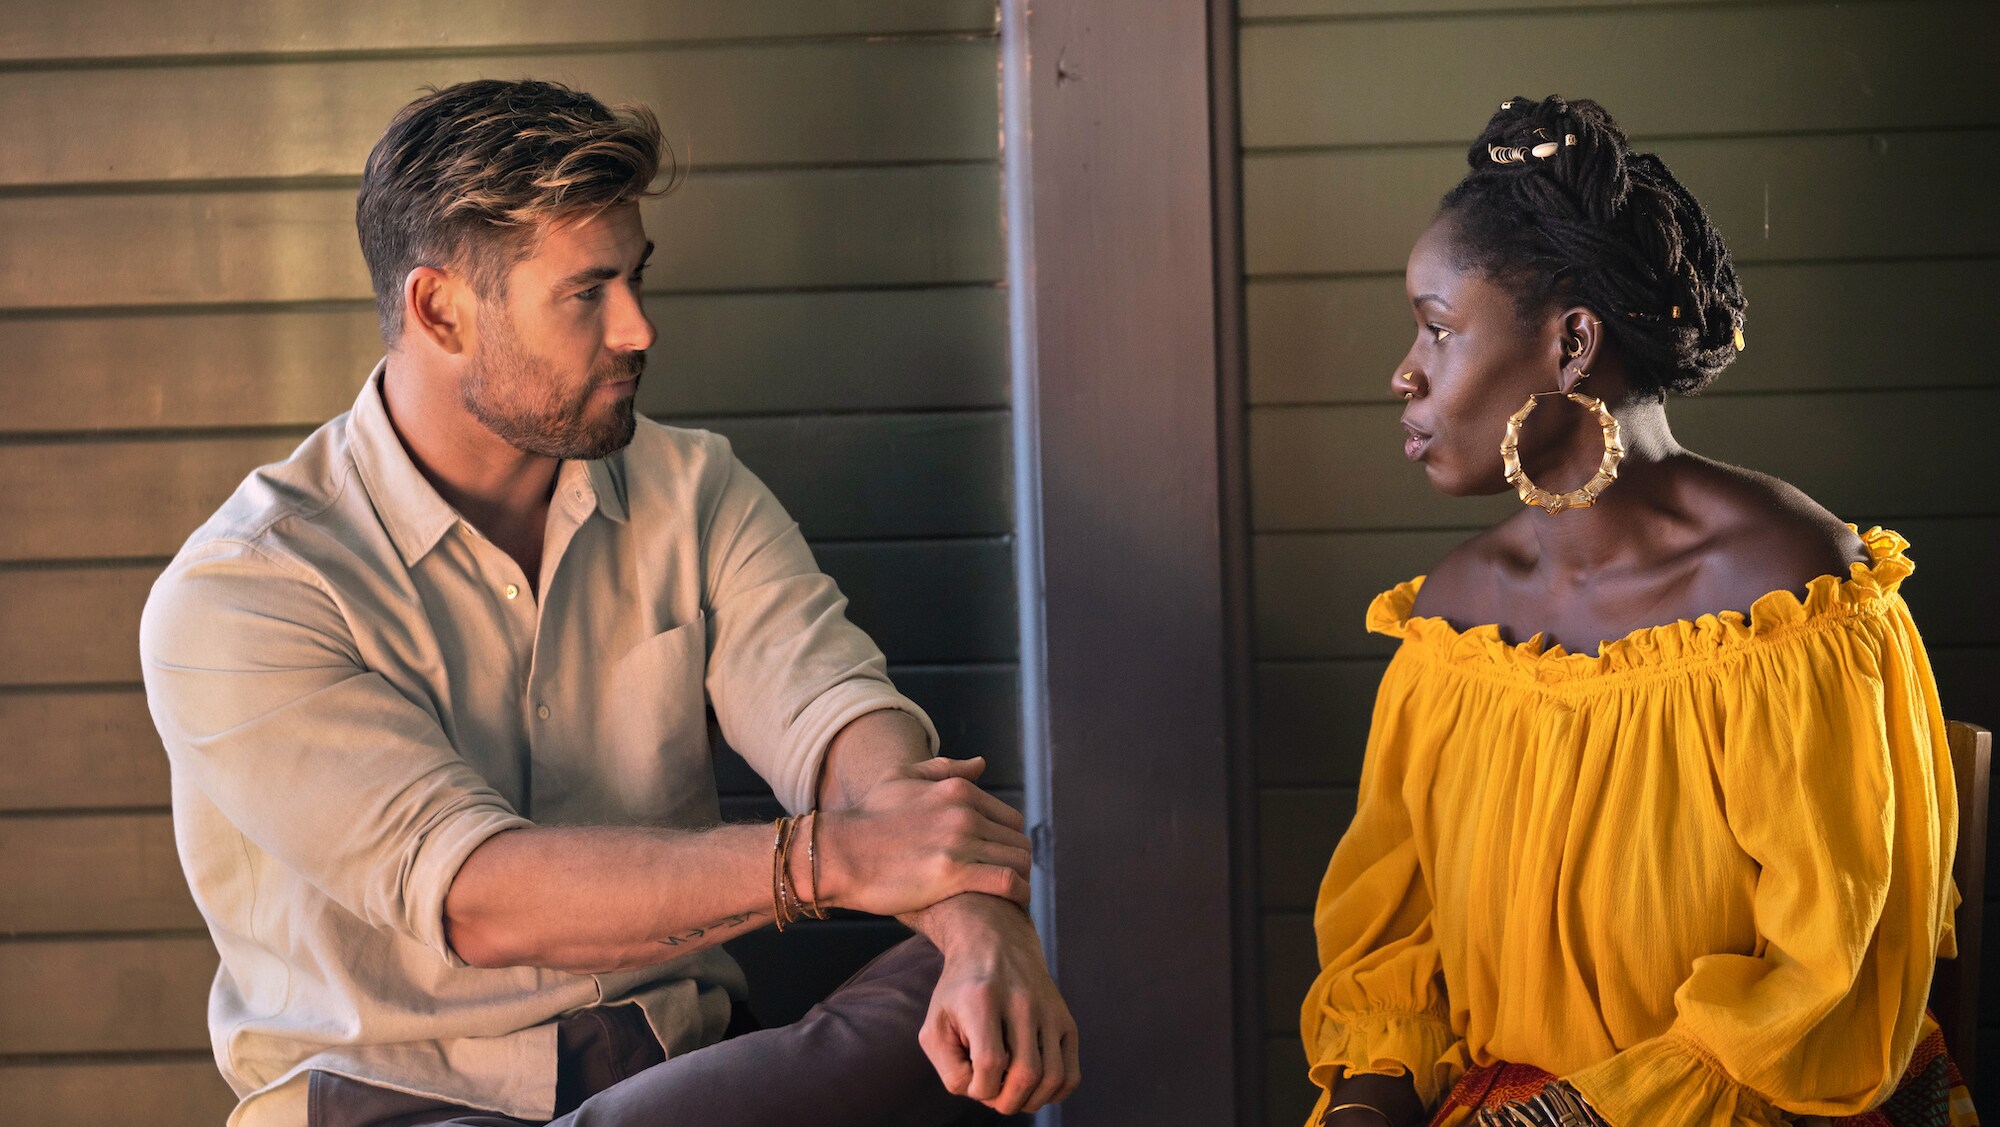 Chris Hemsworth and Alua Arthur discuss accepting death. (National Geographic for Disney+/Craig Parry)